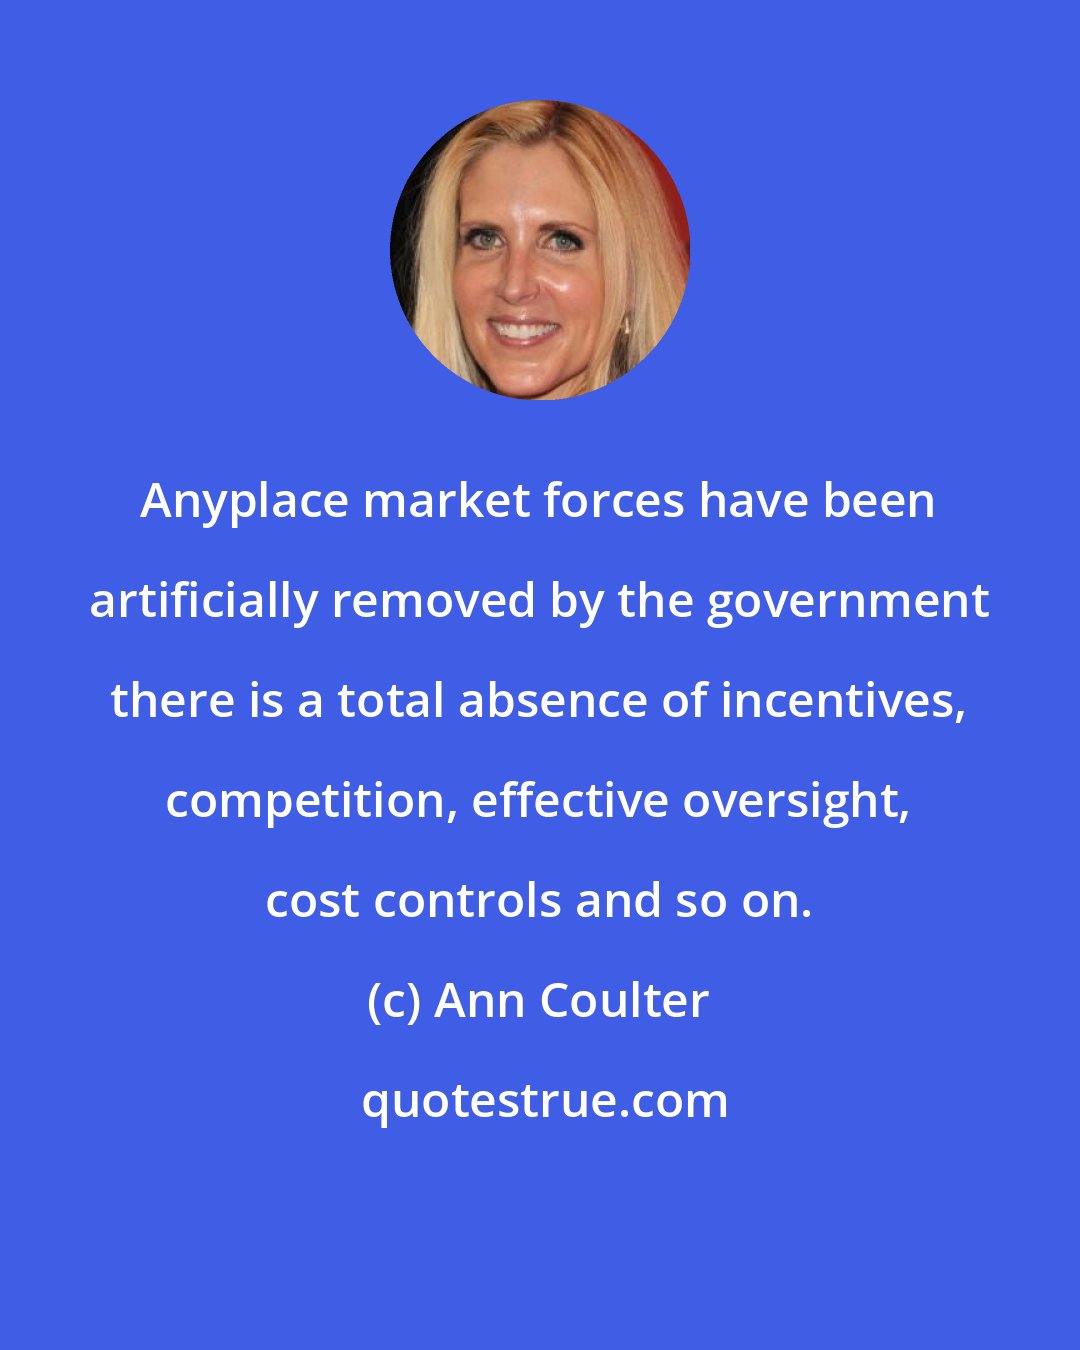 Ann Coulter: Anyplace market forces have been artificially removed by the government there is a total absence of incentives, competition, effective oversight, cost controls and so on.